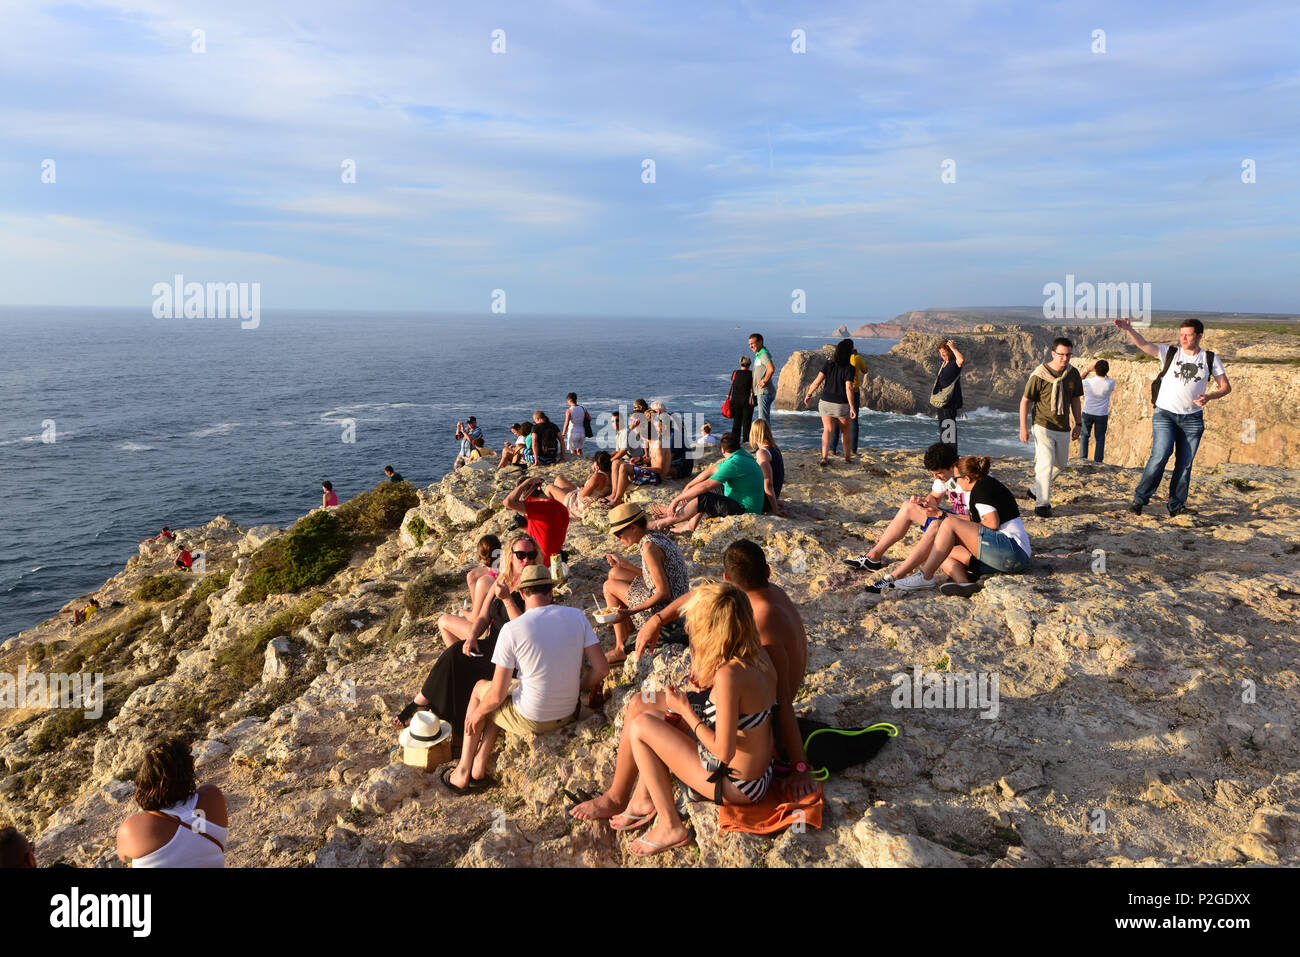 People watching the sunset at Cabo Sao Vicente near Sagres, Algarve, Portugal Stock Photo